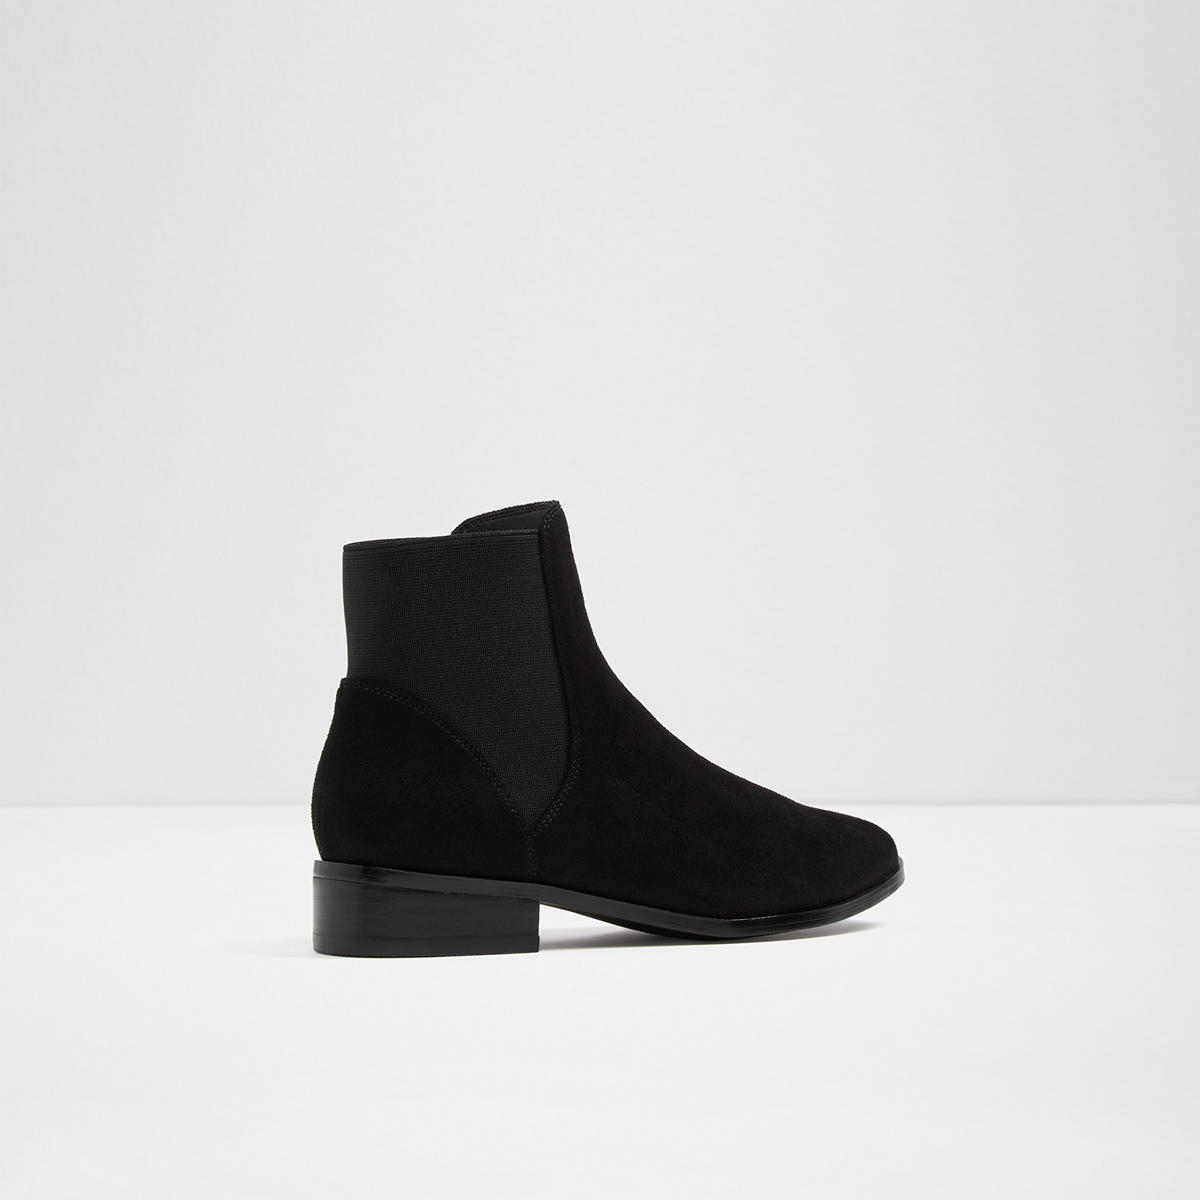 Nydia Midnight Black Women's Ankle boots | Aldoshoes.com US